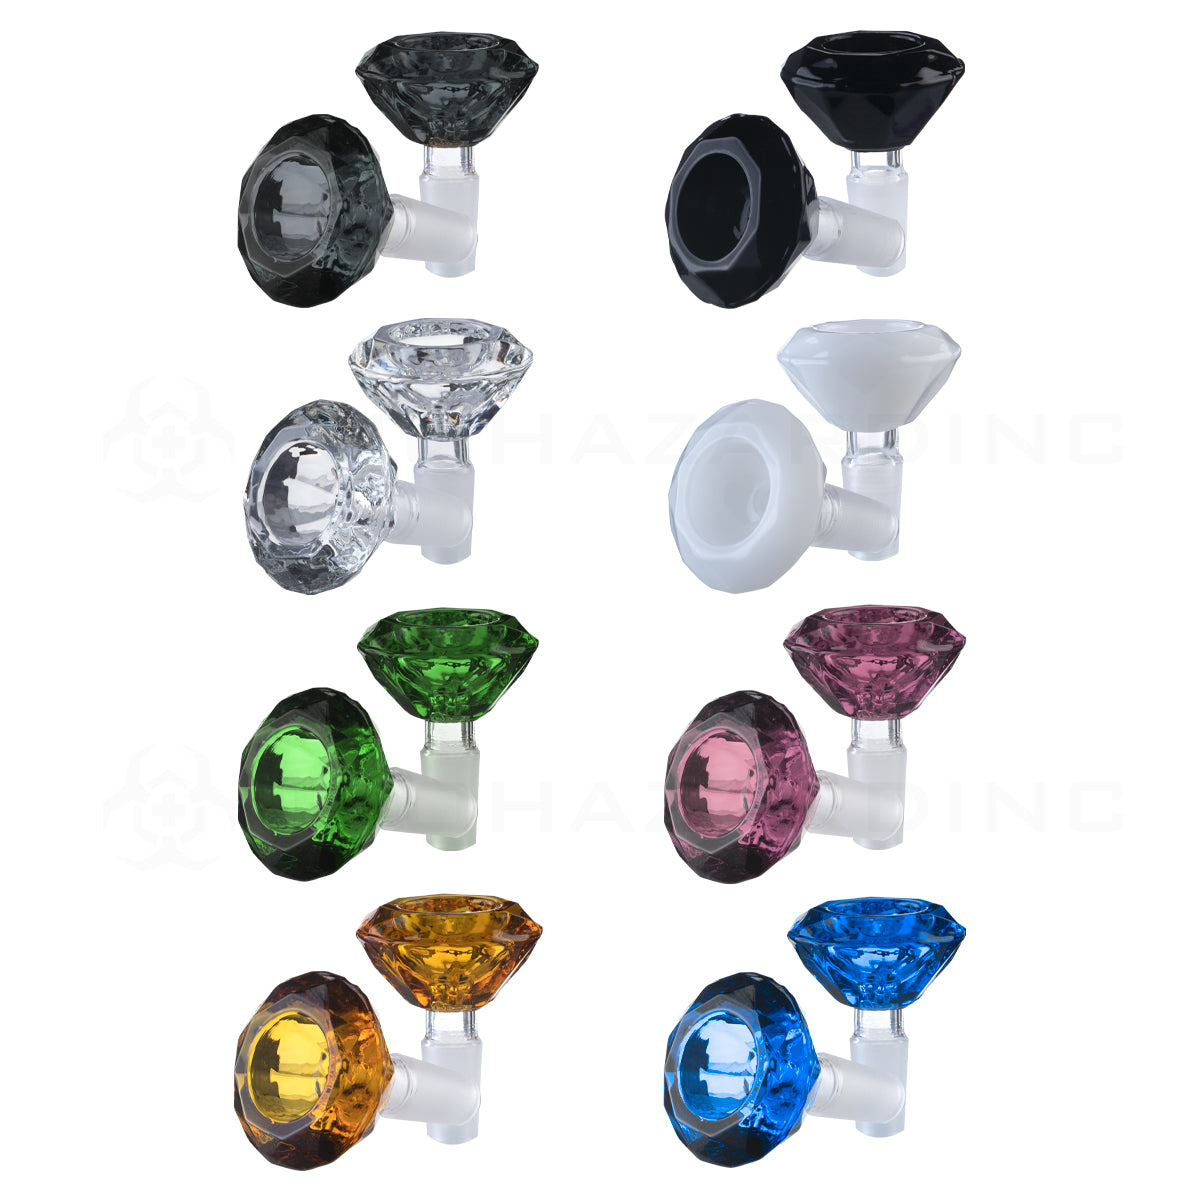 Bowl | Diamond Shaped Bowl | 14mm - Assorted Colors - 16 Count Glass Bowl Biohazard Inc   